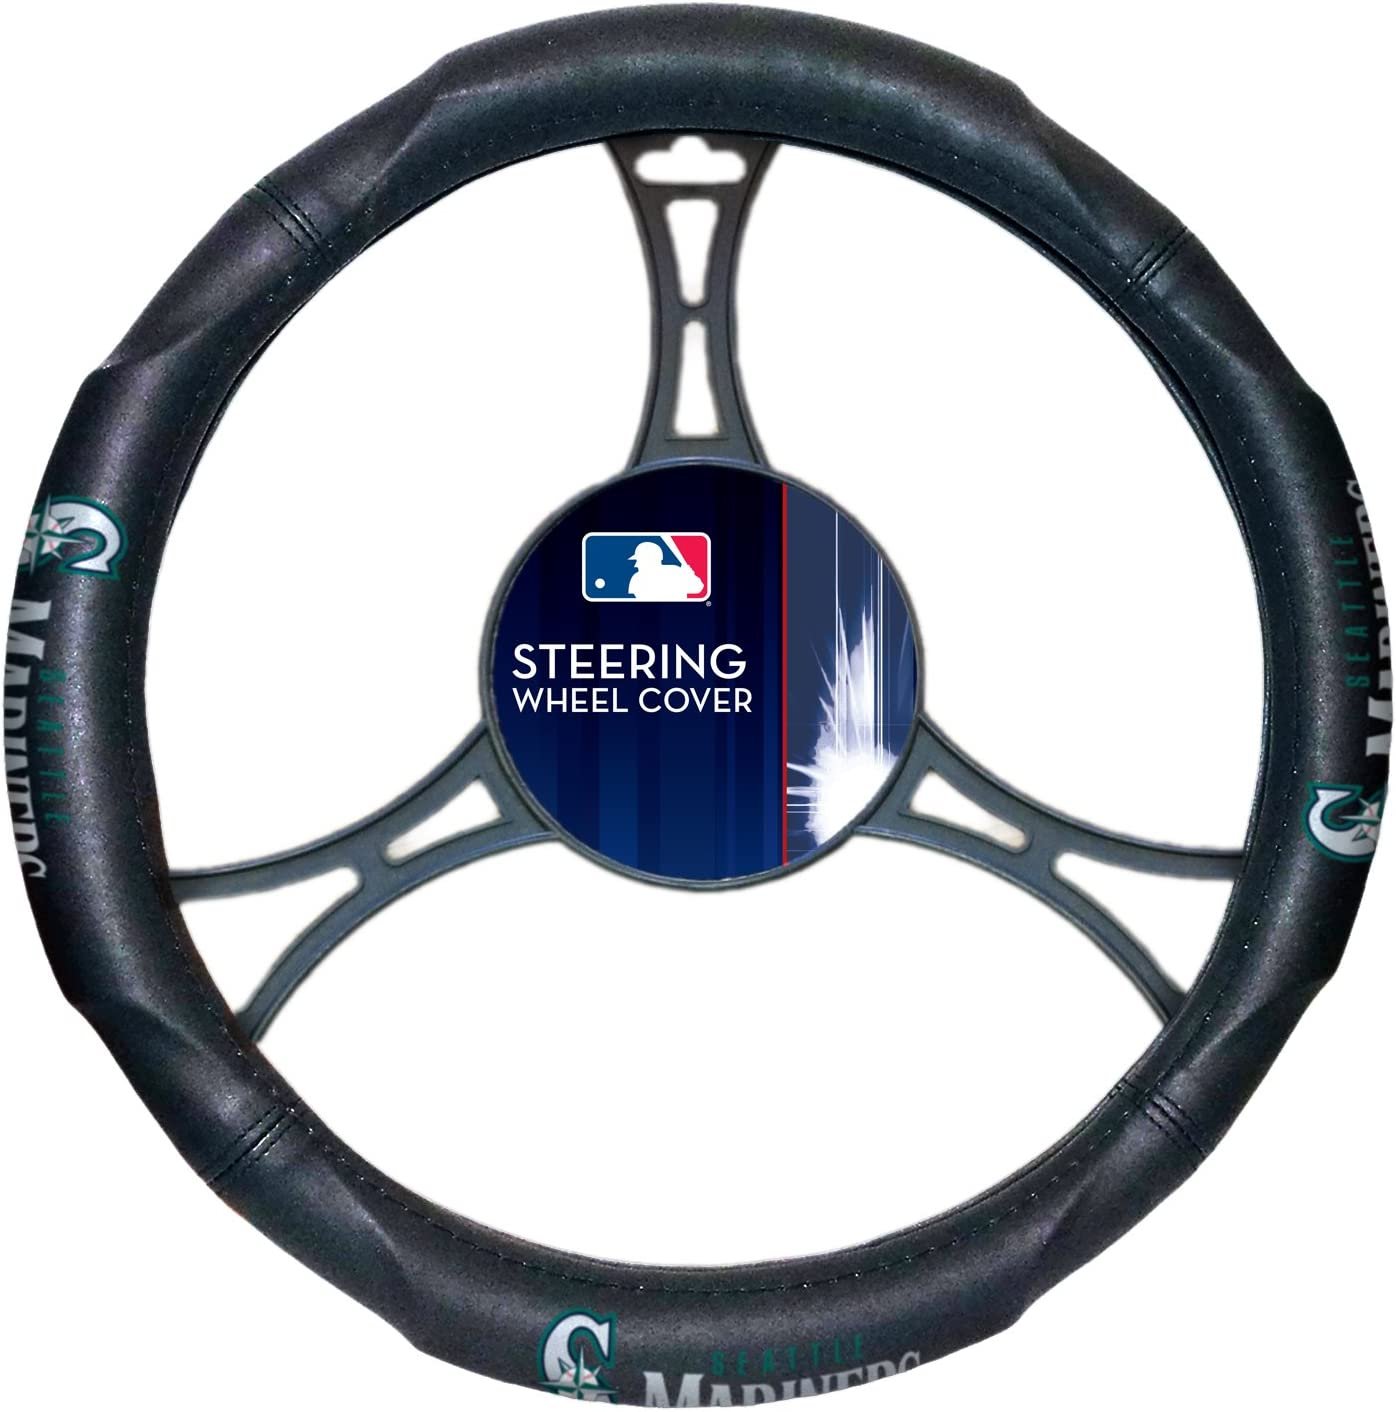 Seattle Mariners Steering Wheel Cover Fits up to 15 Inch Wheels Rubber PVC